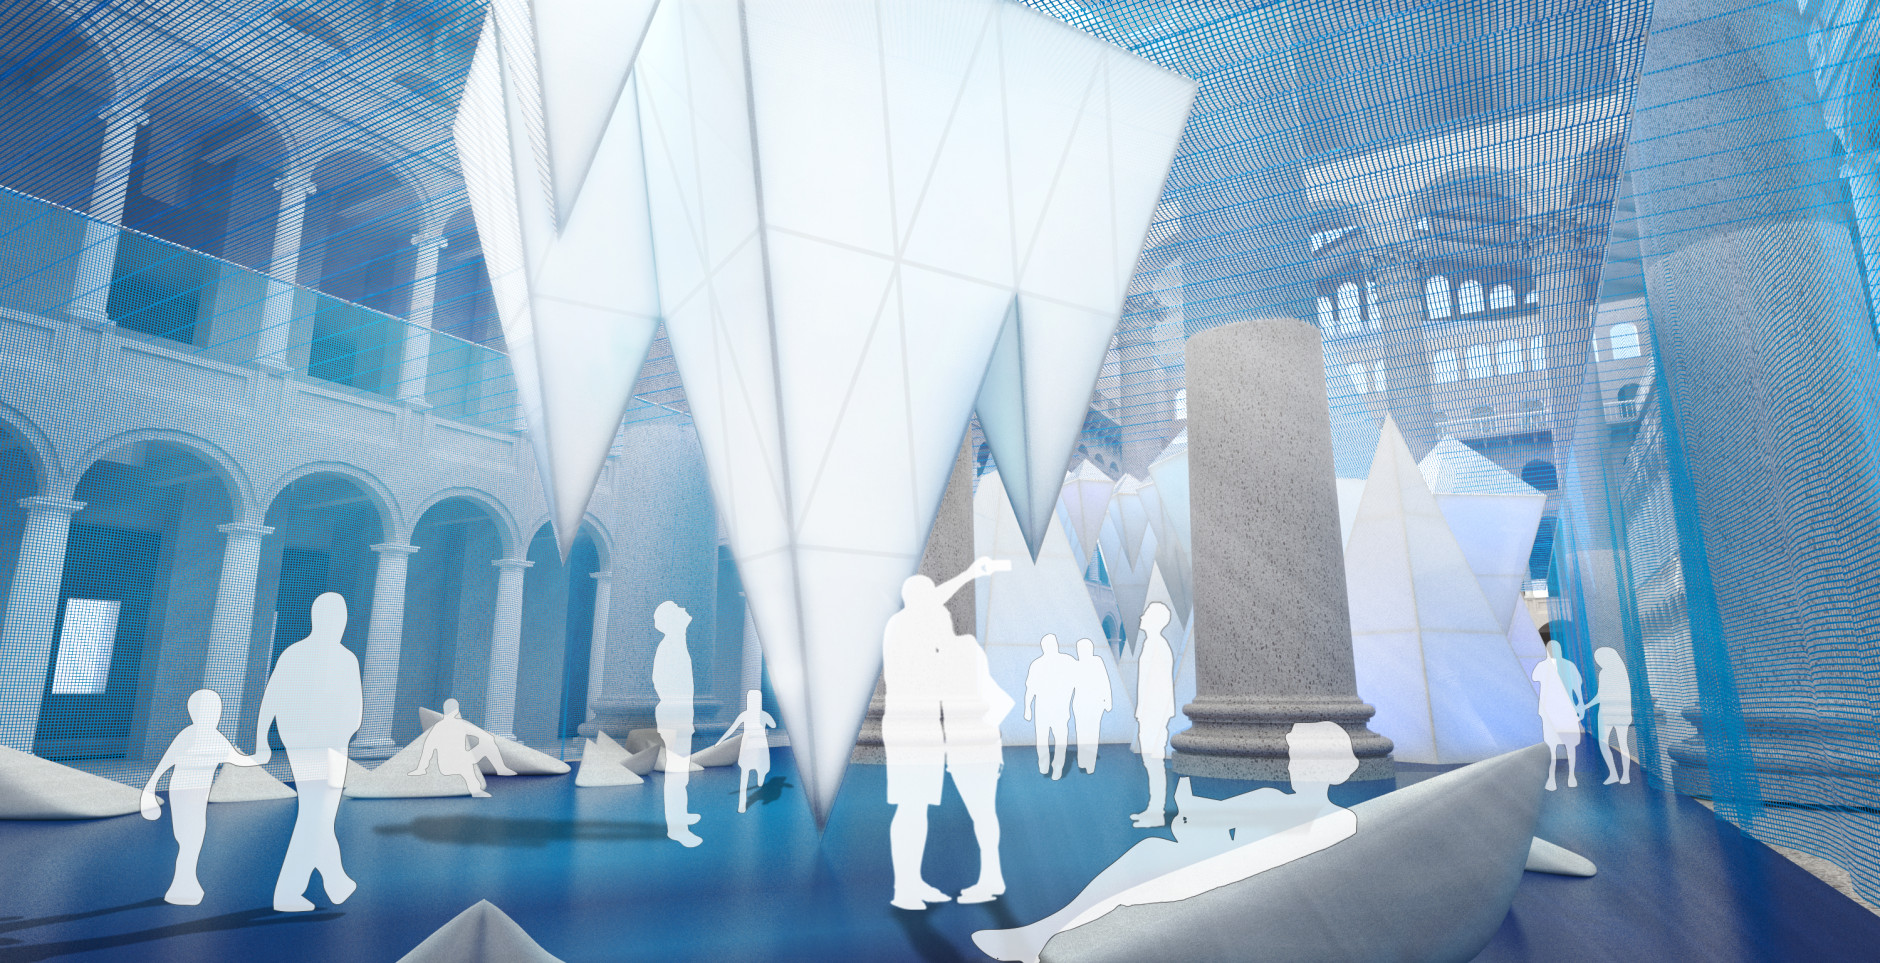 Visitors will be able to look down from the balcony into the display, and visitors on the ground floor can look up to the highest "iceberg", at 56 feet. (Courtesy of National Building Museum)